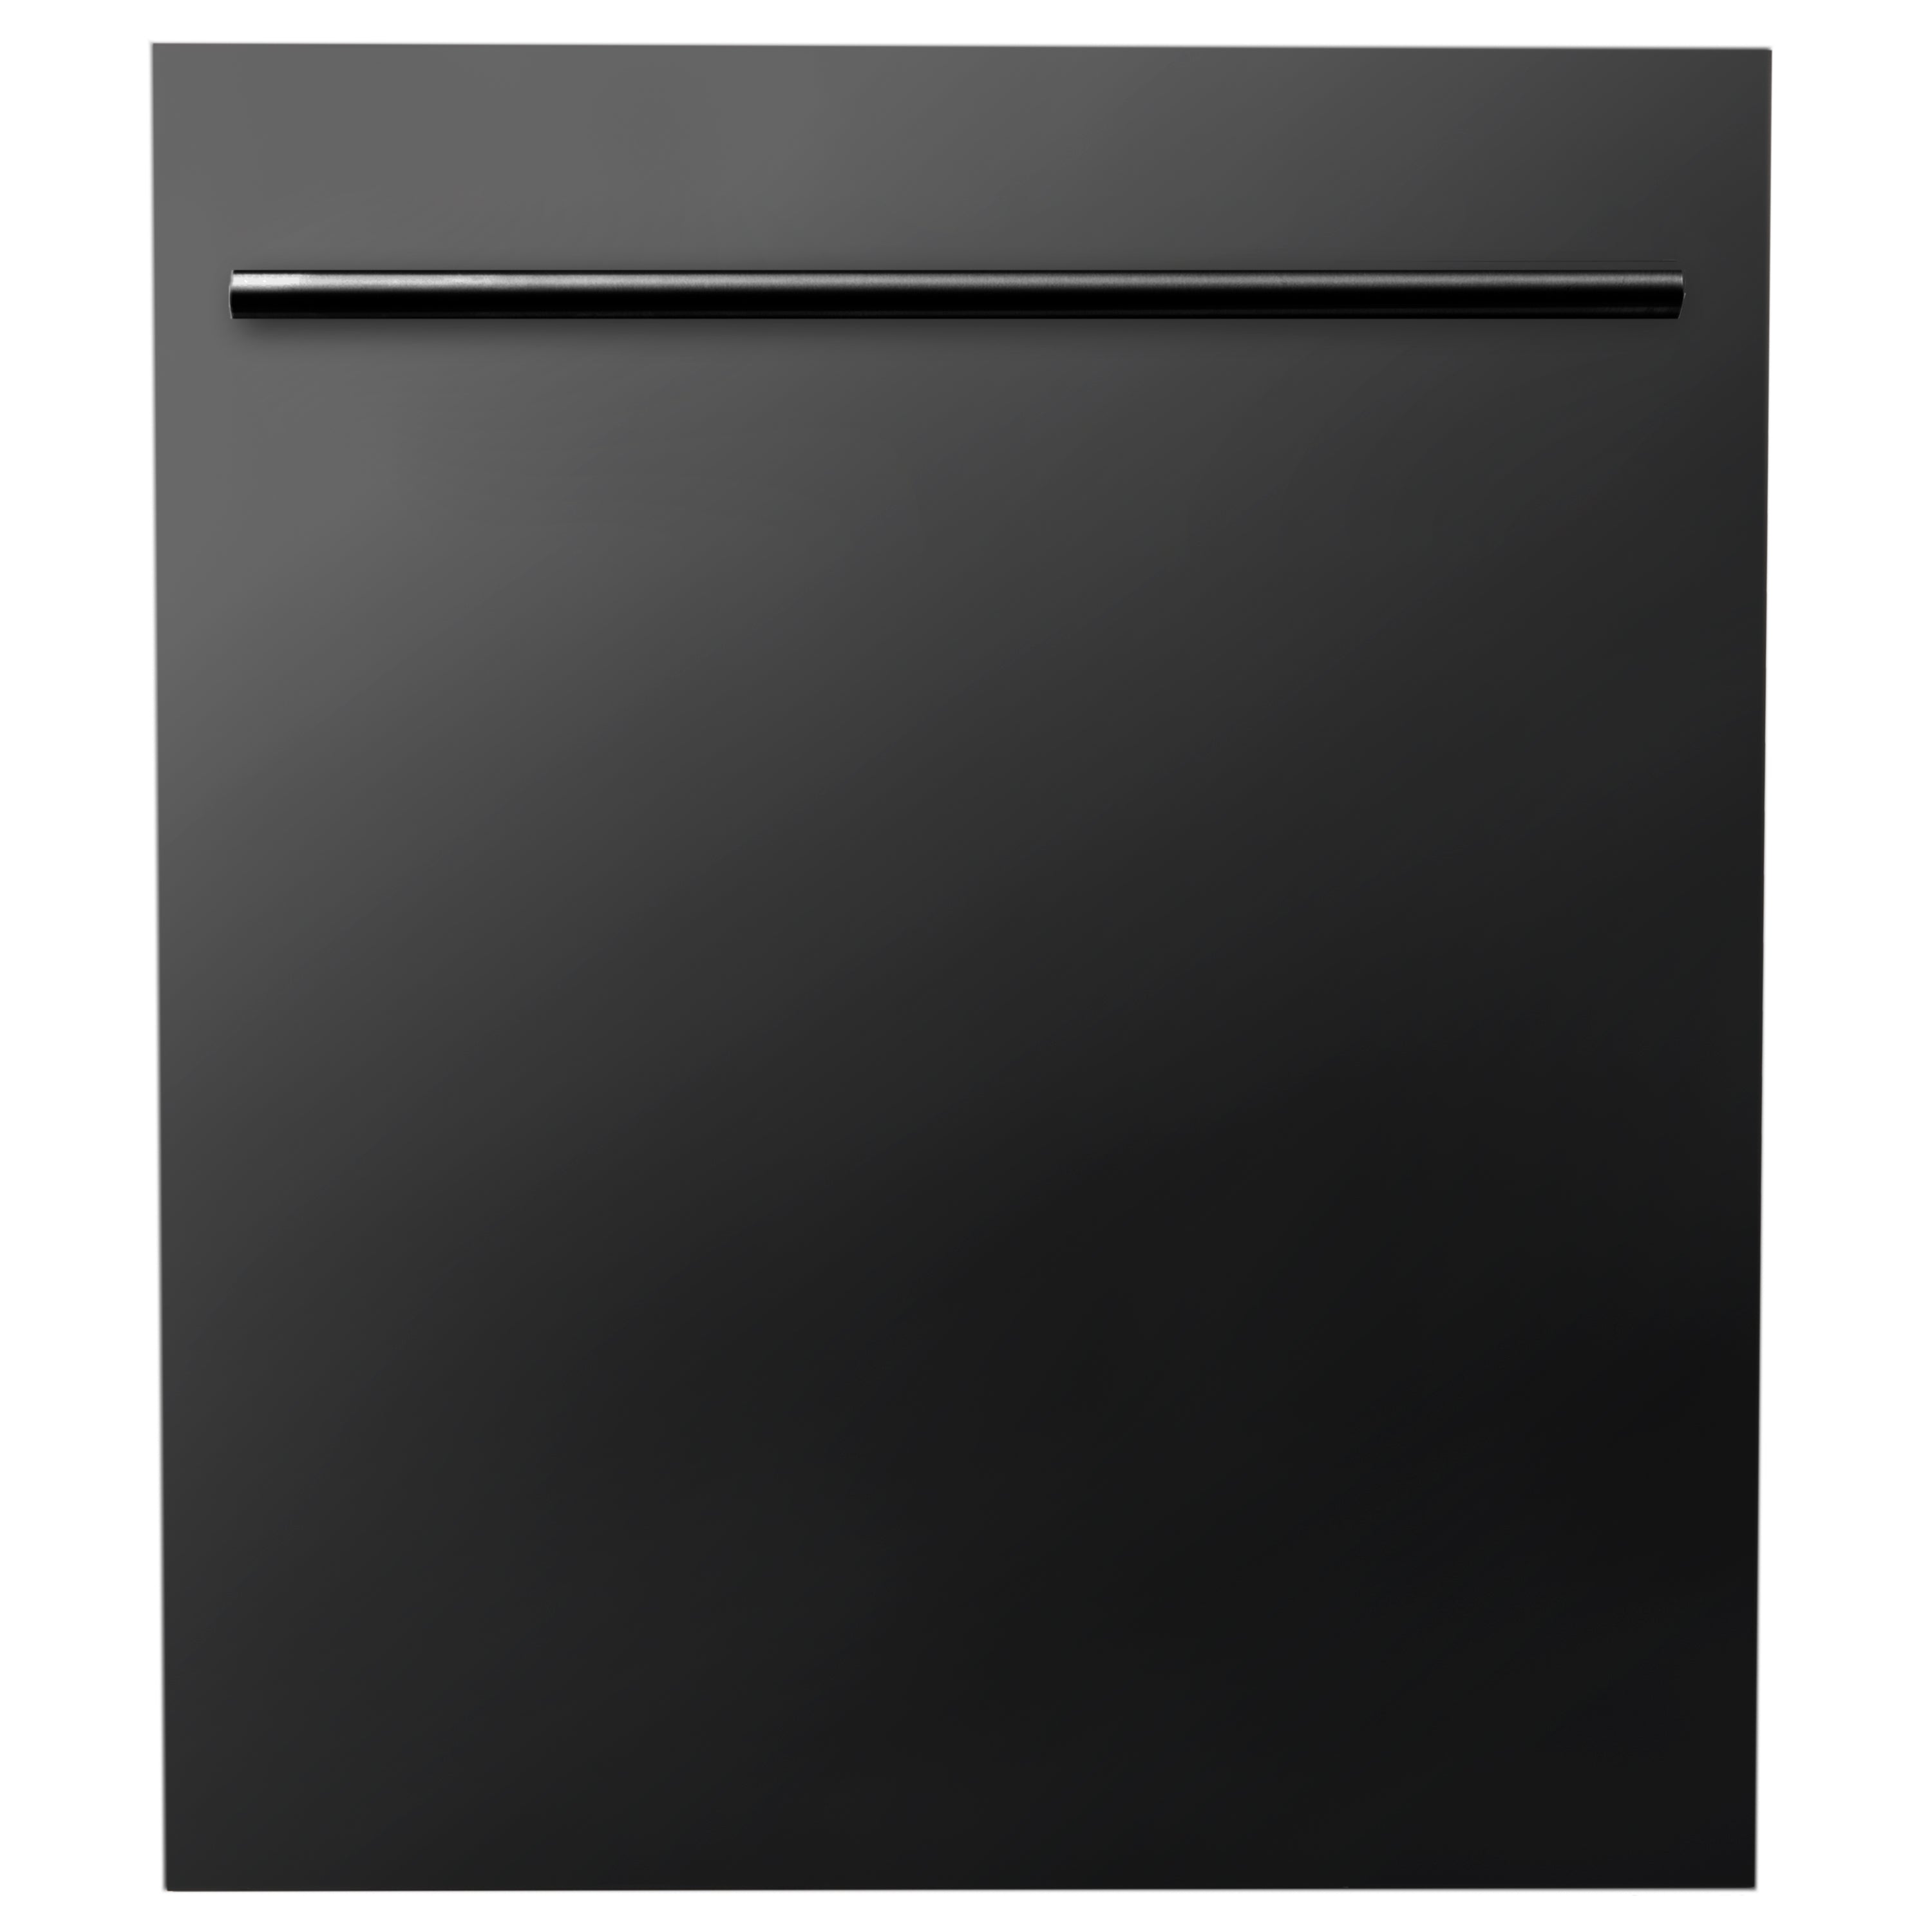 ZLINE 24" Dishwasher Panel in Black Stainless Steel with Modern Handle (DP-BS-H-24)